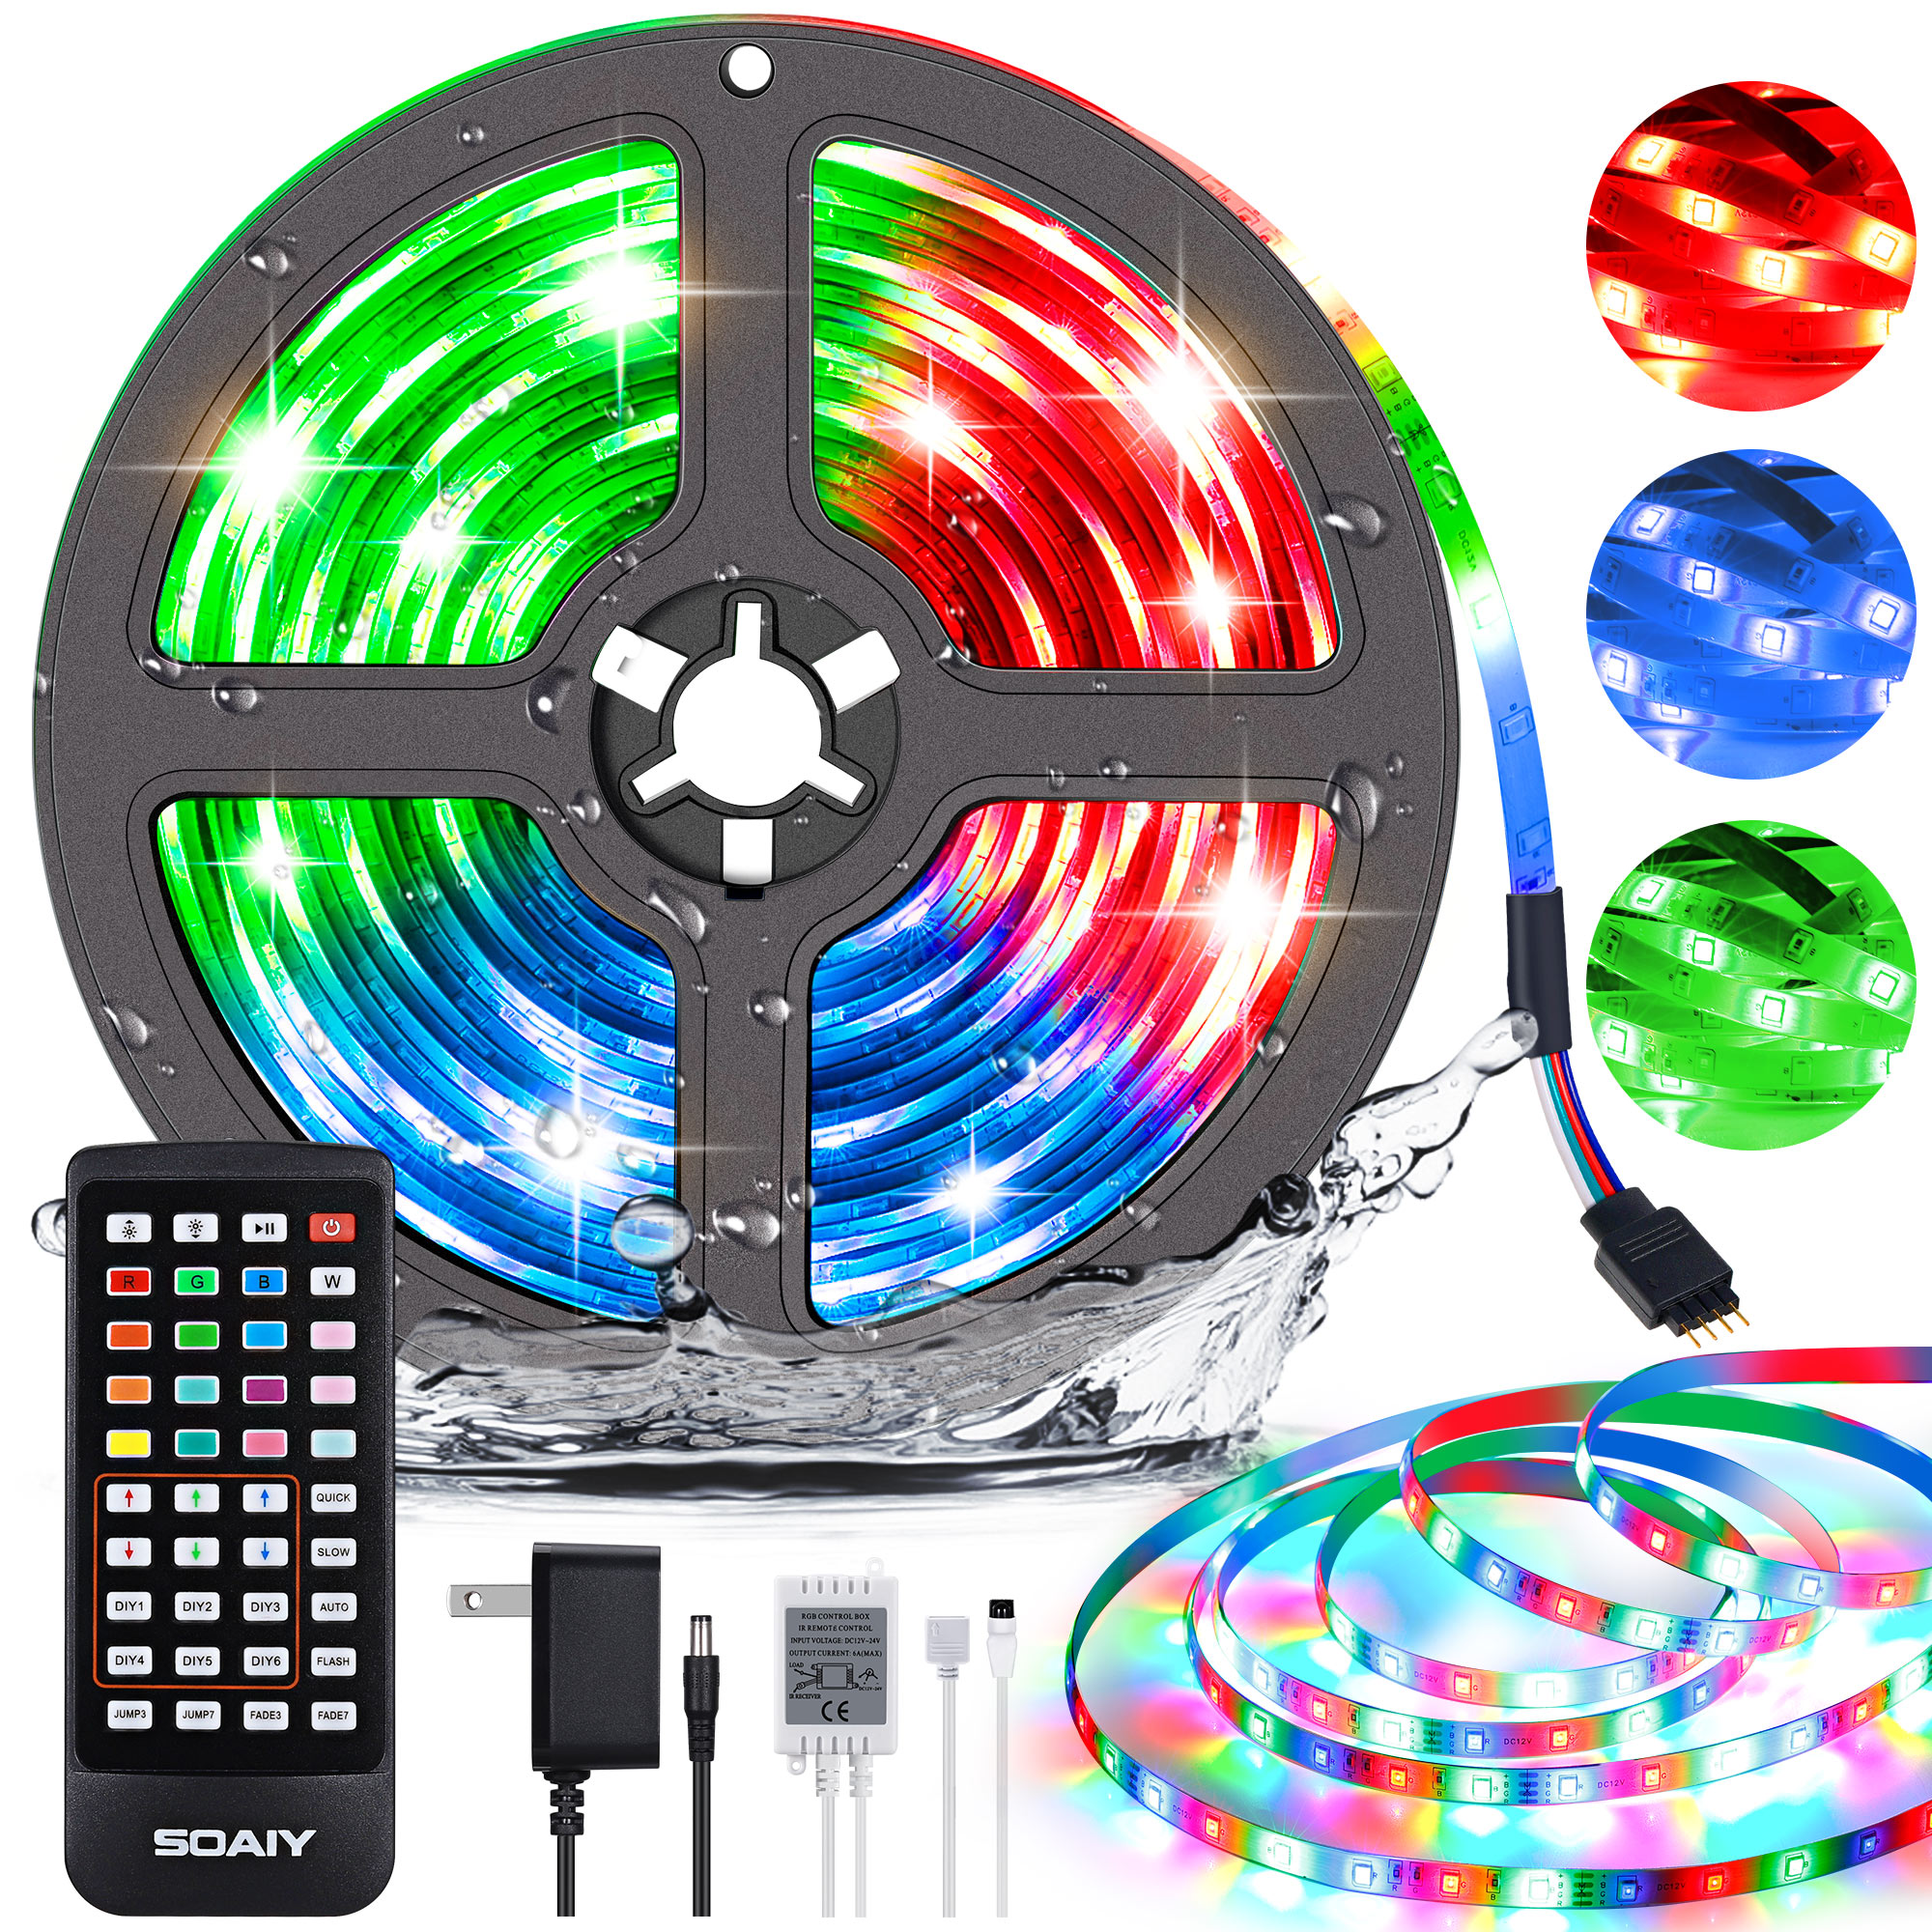 LED Lights Strip in Home,SOAIY Waterproof Adhesive Tape Lights,16.4ft RGB DIY Color Changing Rope Lights for TV Backlight Halloween Christmas lights w/IR Remote Control - image 1 of 16